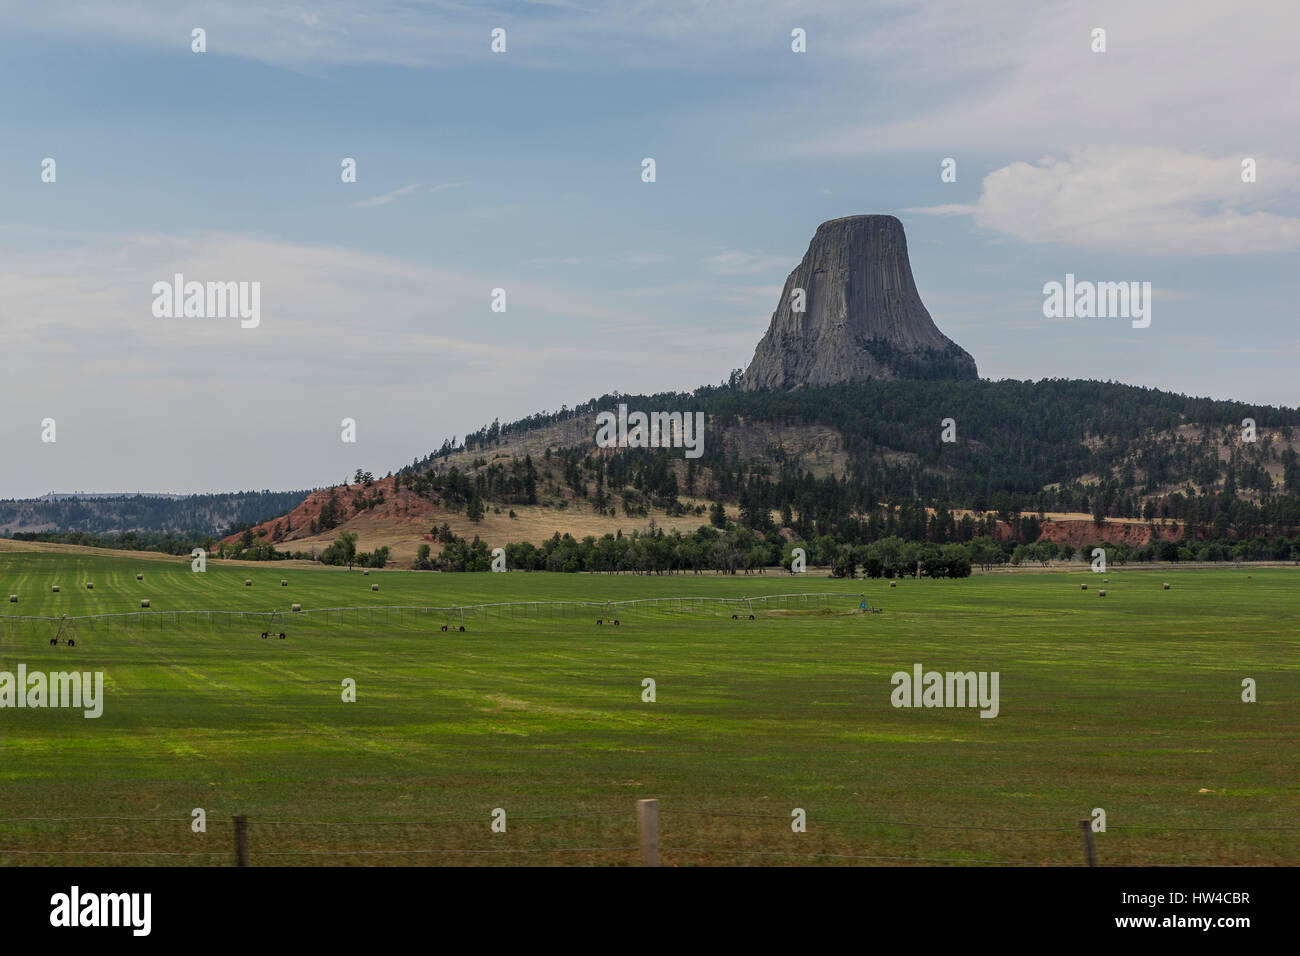 Devils Tower rock and farm fields in remote landscape, Wyoming, United States Stock Photo